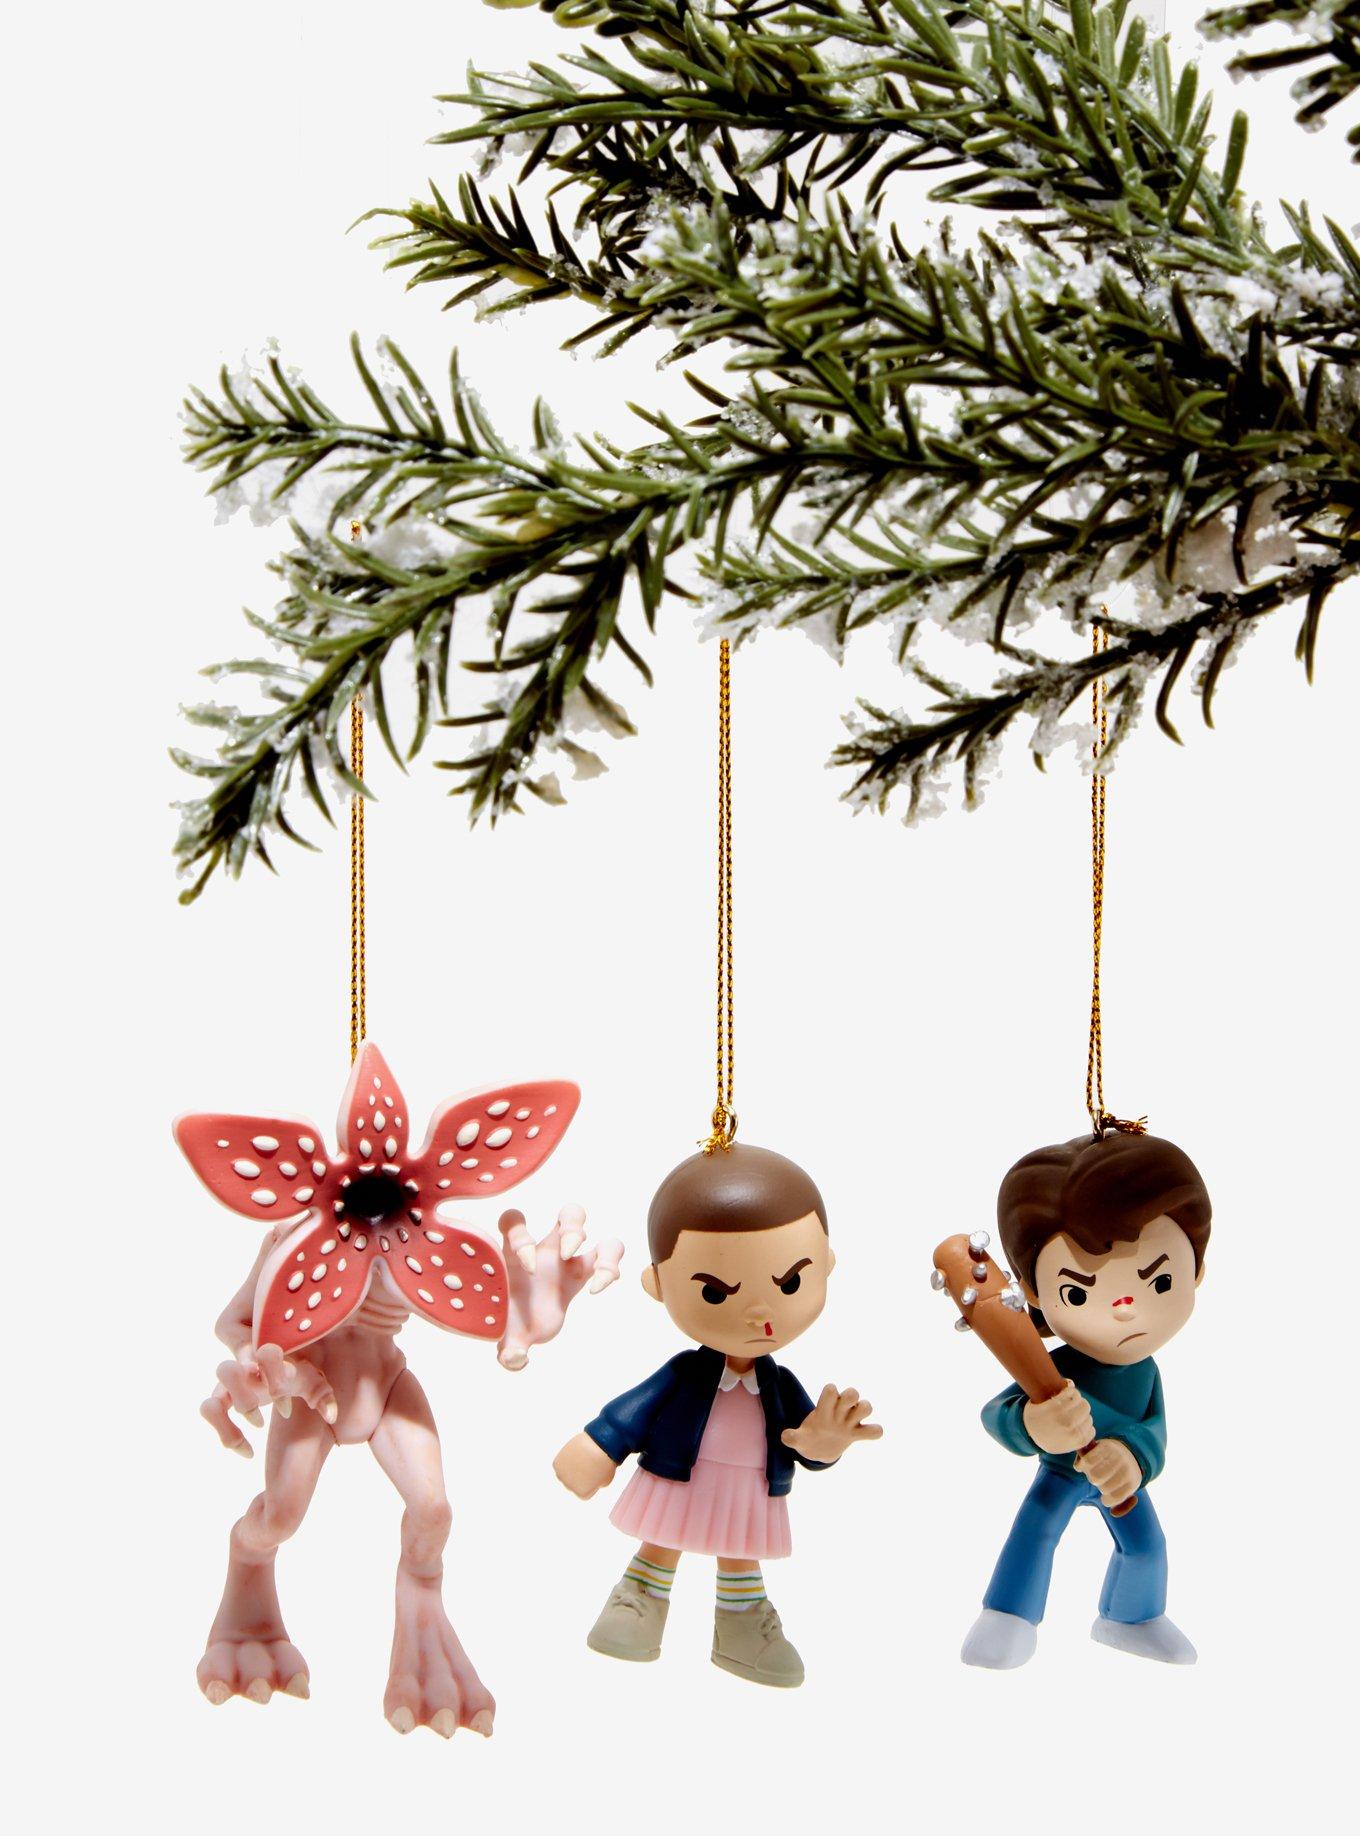 Stranger Things Will Ornament - Entertainment Earth